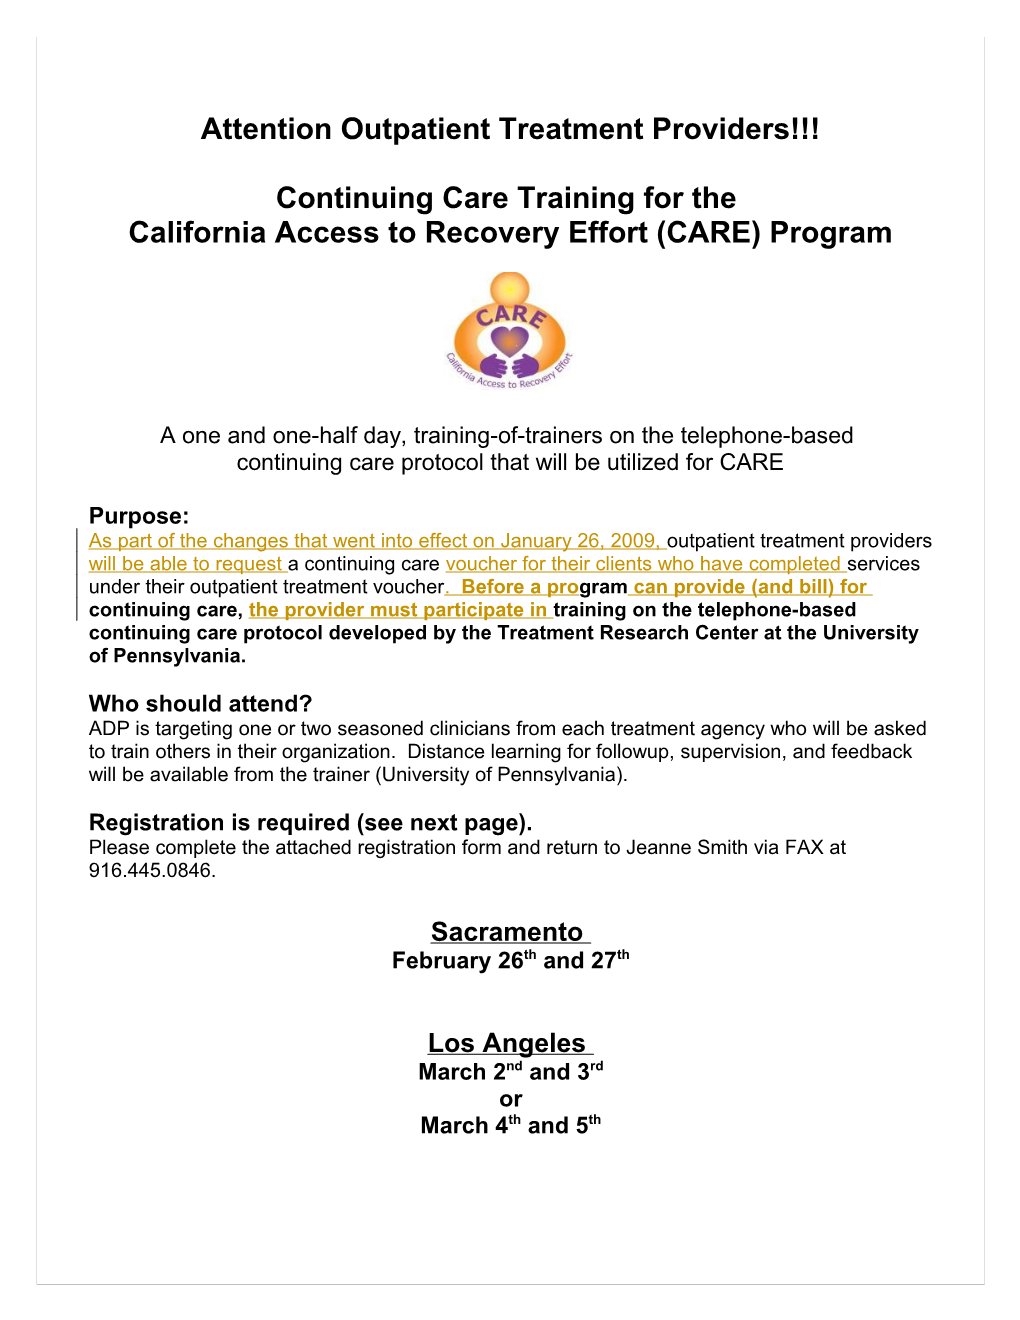 California Access to Recovery Effort CARE Program